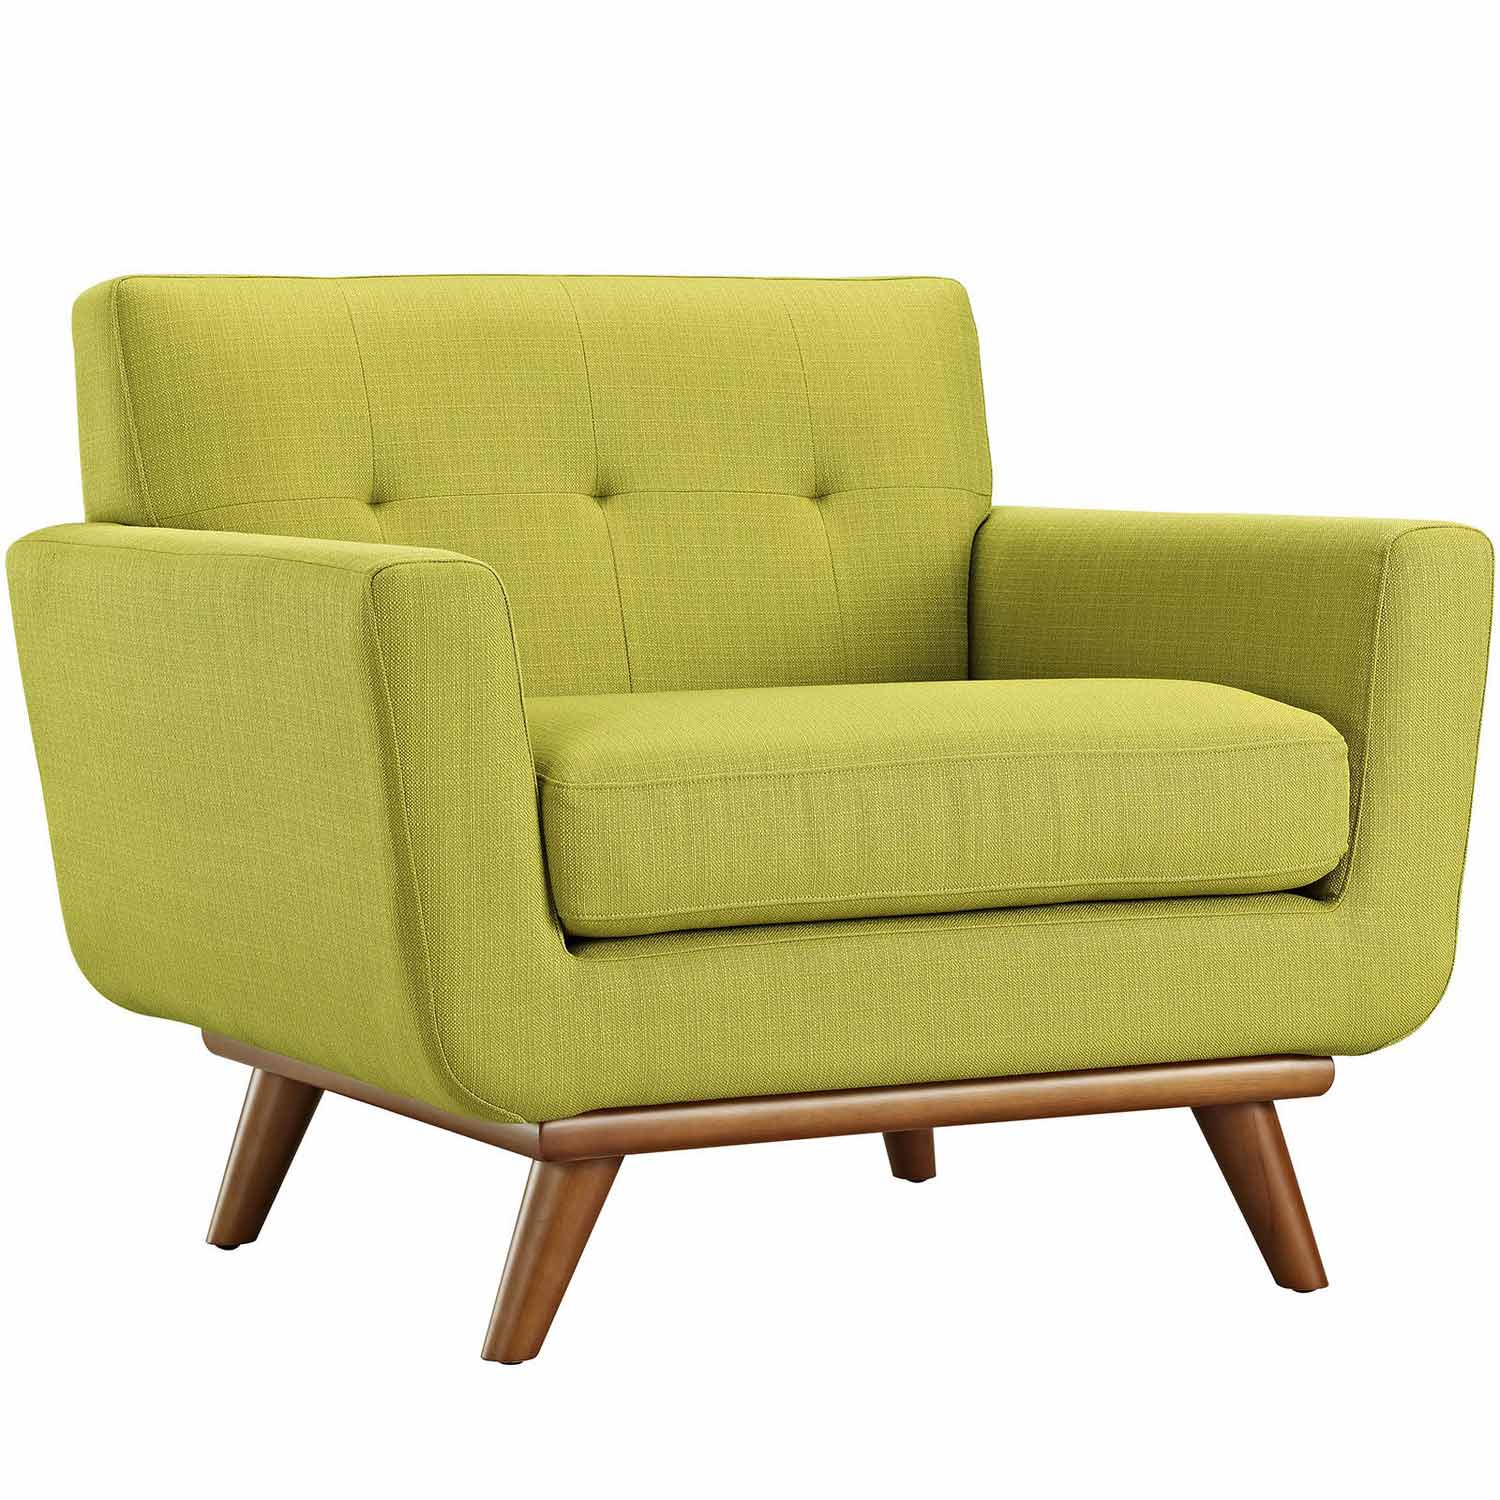 Modway Engage Upholstered Armchair - Wheatgrass